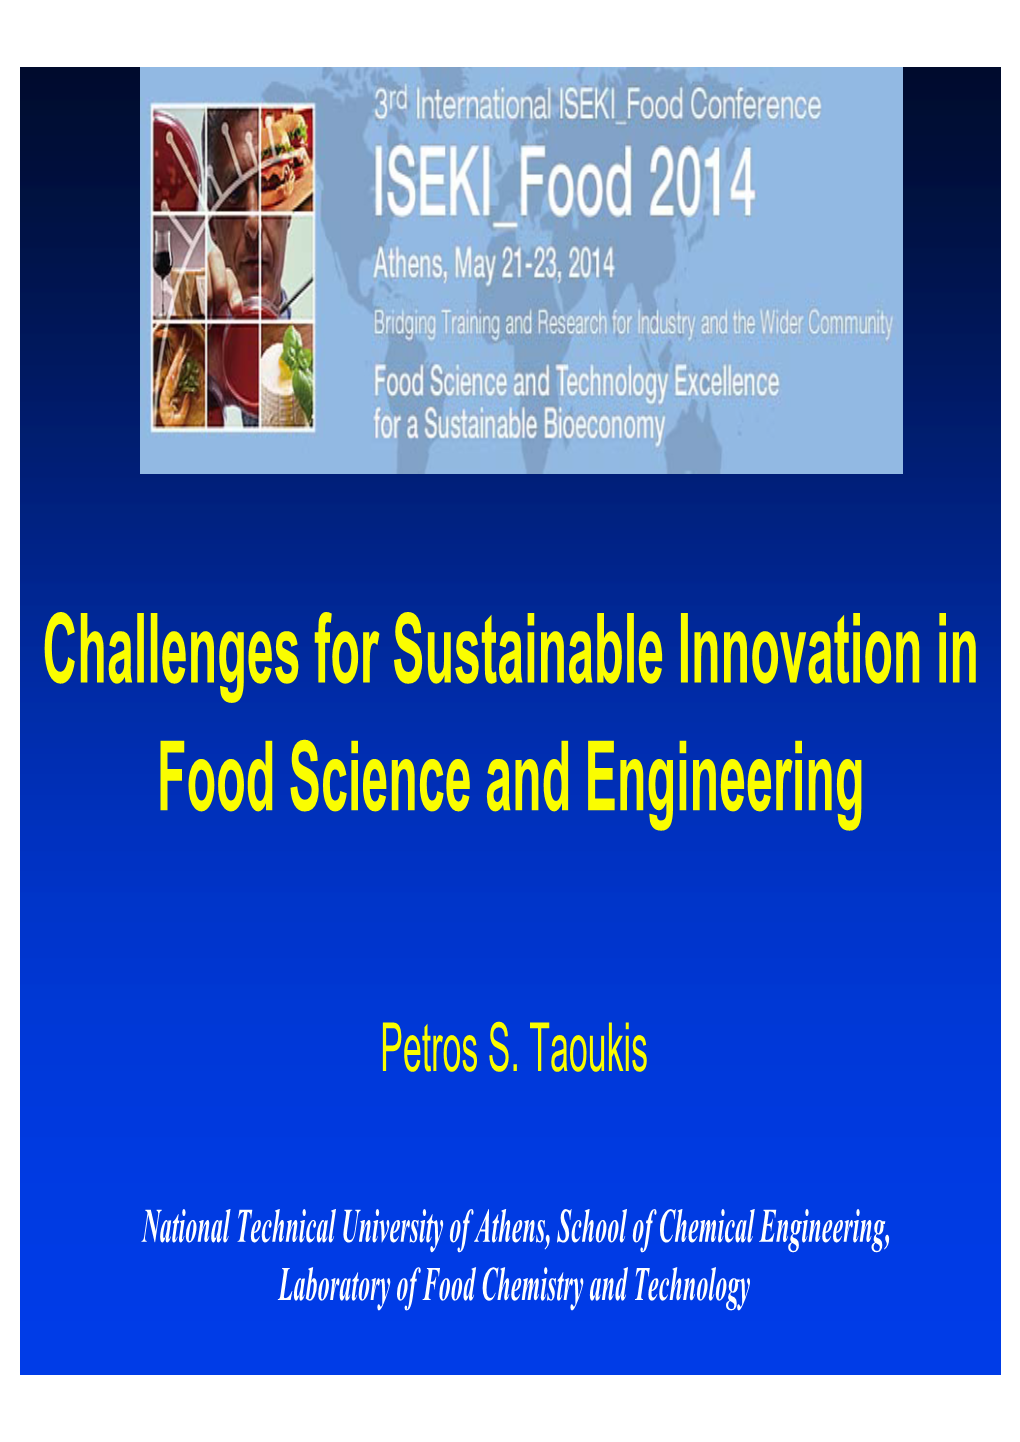 Challenges for Sustainable Innovation in Food Science and Engineering